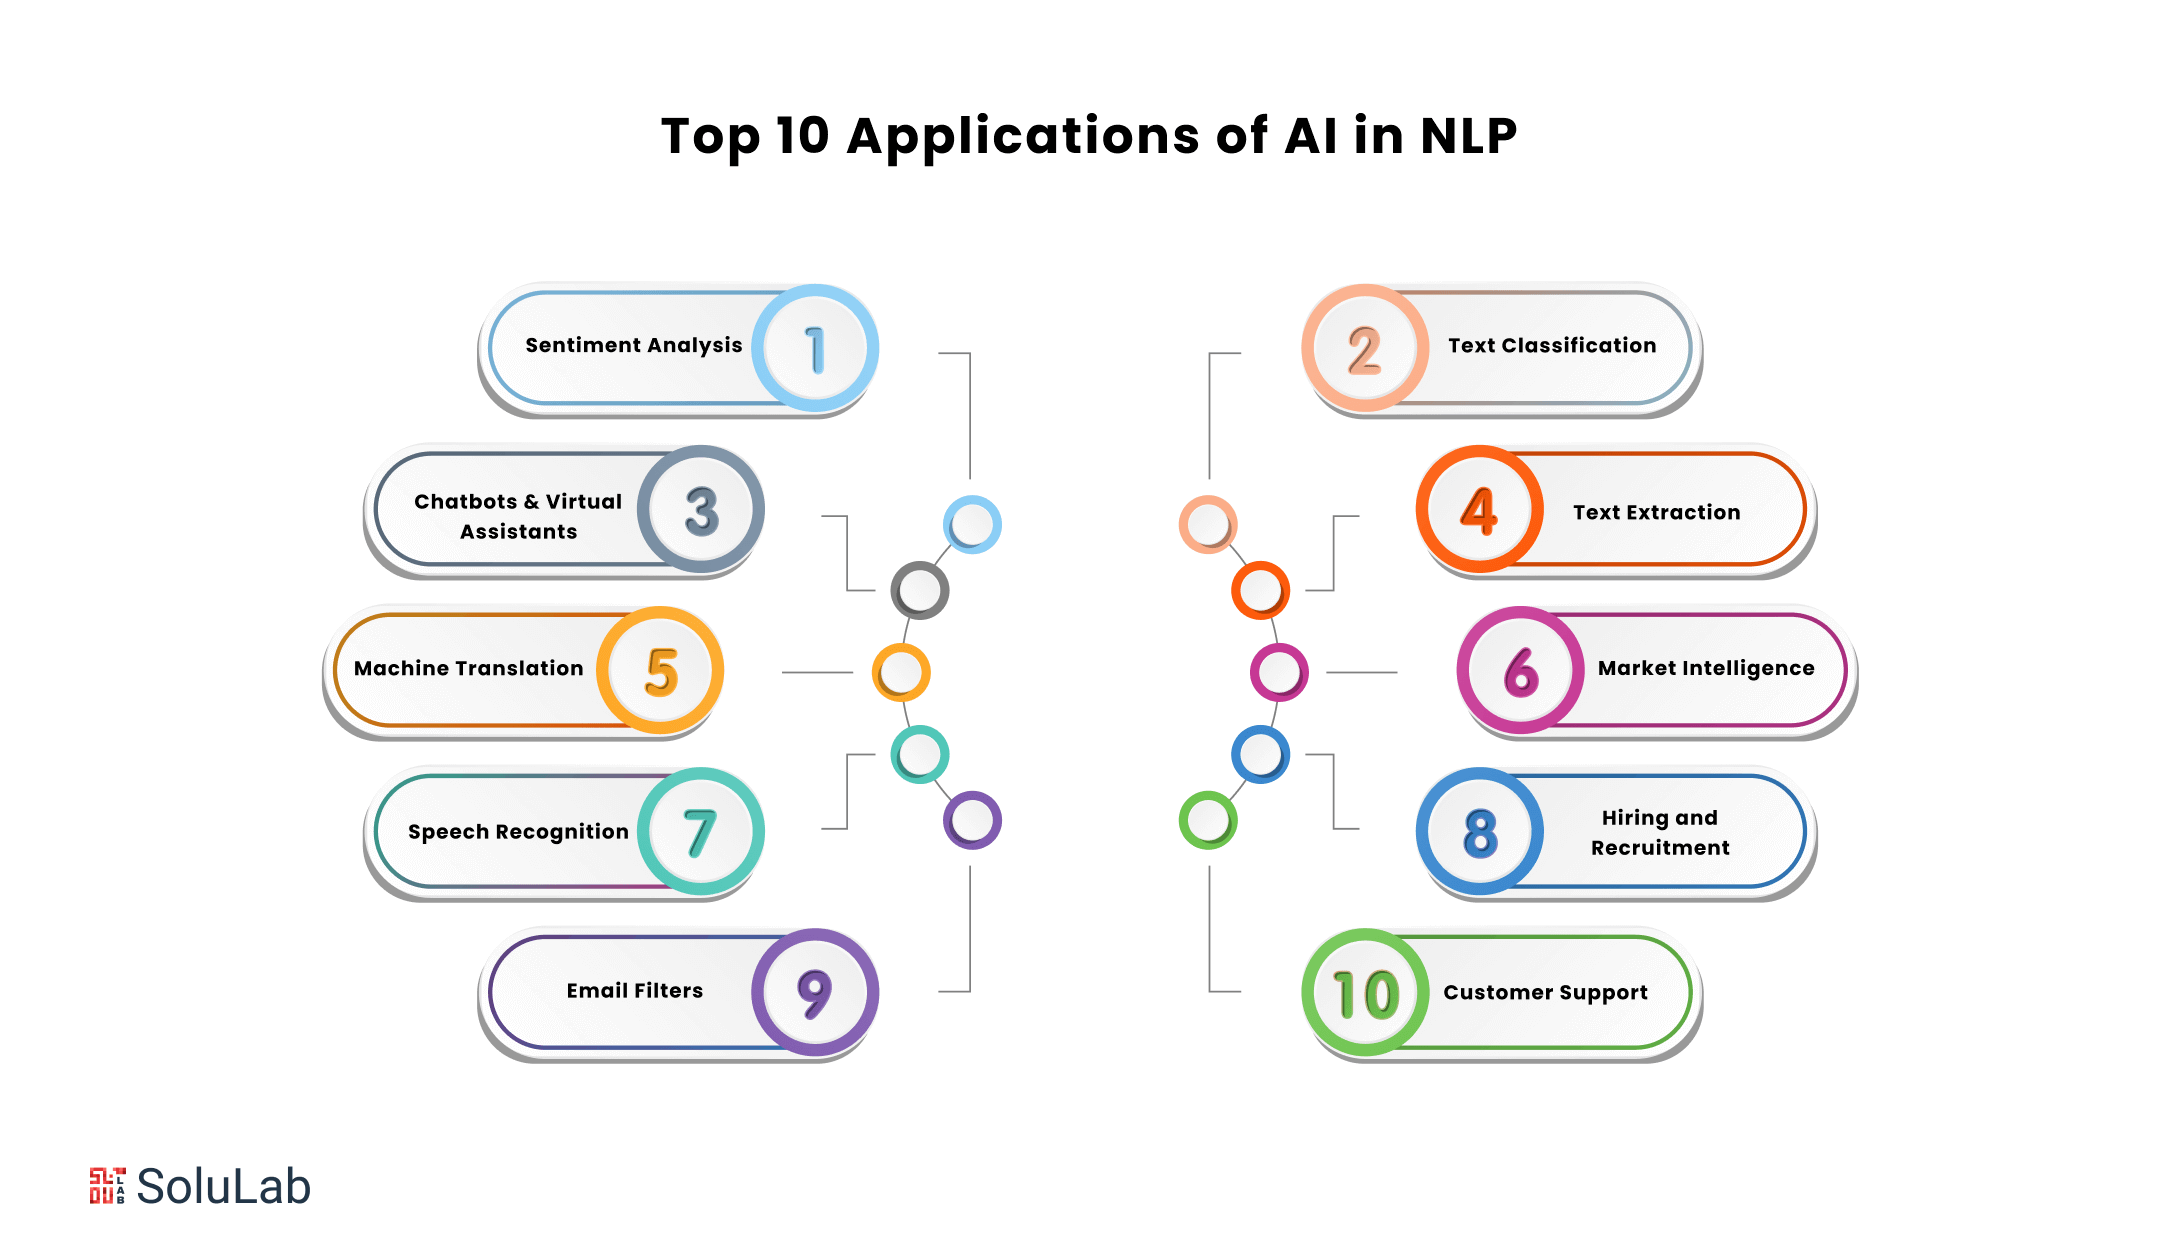 Top 10 Applications of AI in NLP